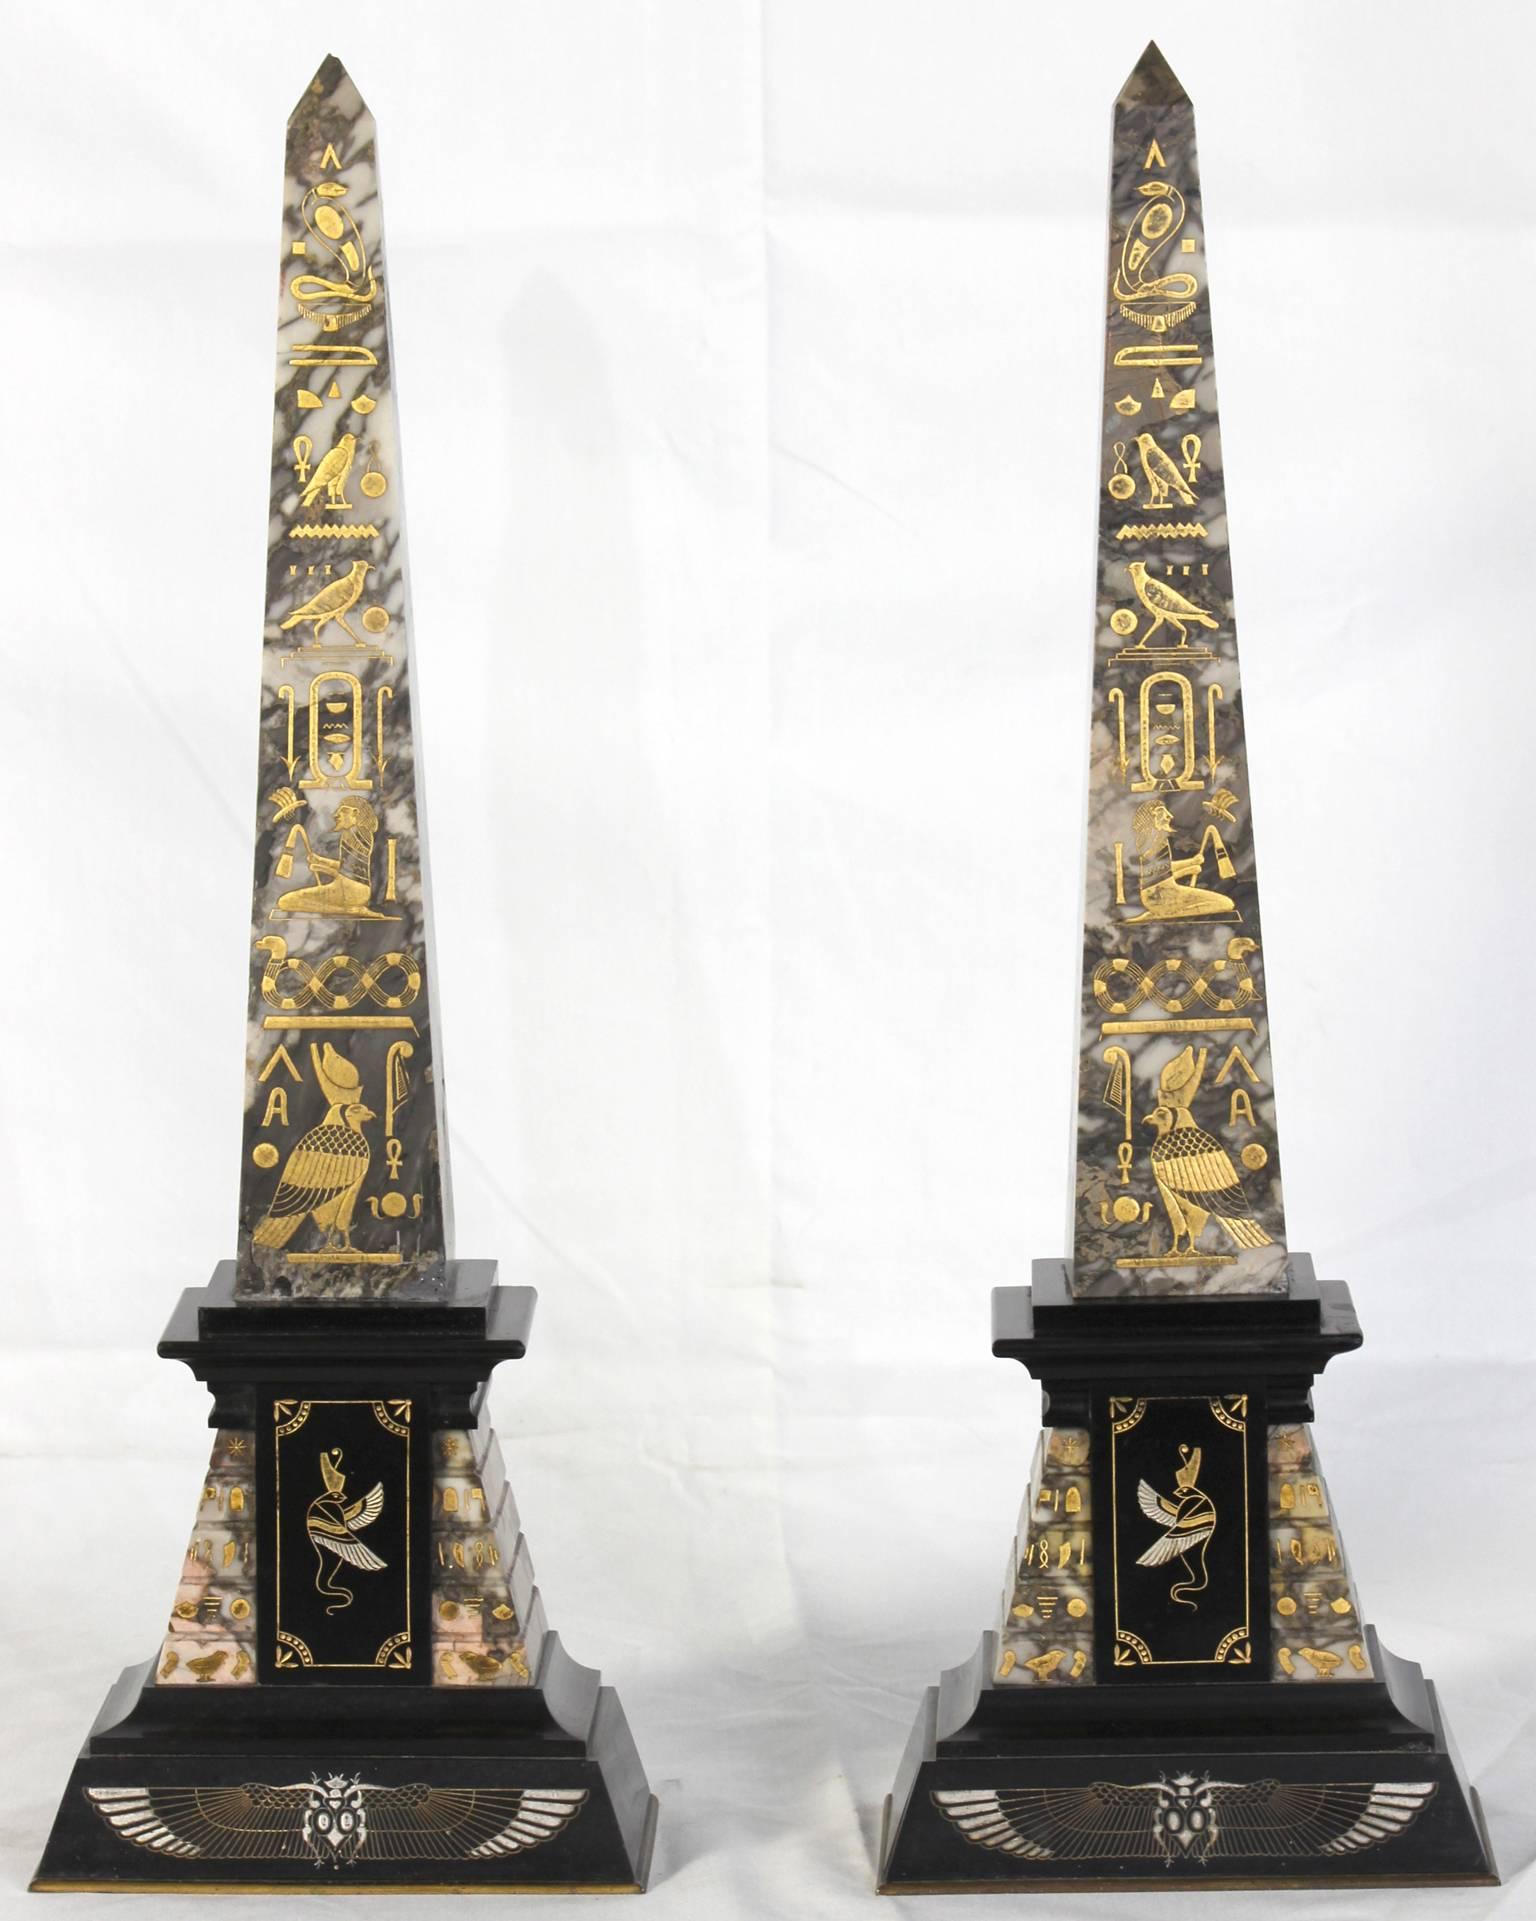 A pair of late 19th century grey marble Egyptian Revival obelisks with incised faux hieroglyphics to front accented in gold and silver enamel on a tiered base accented with black slate.